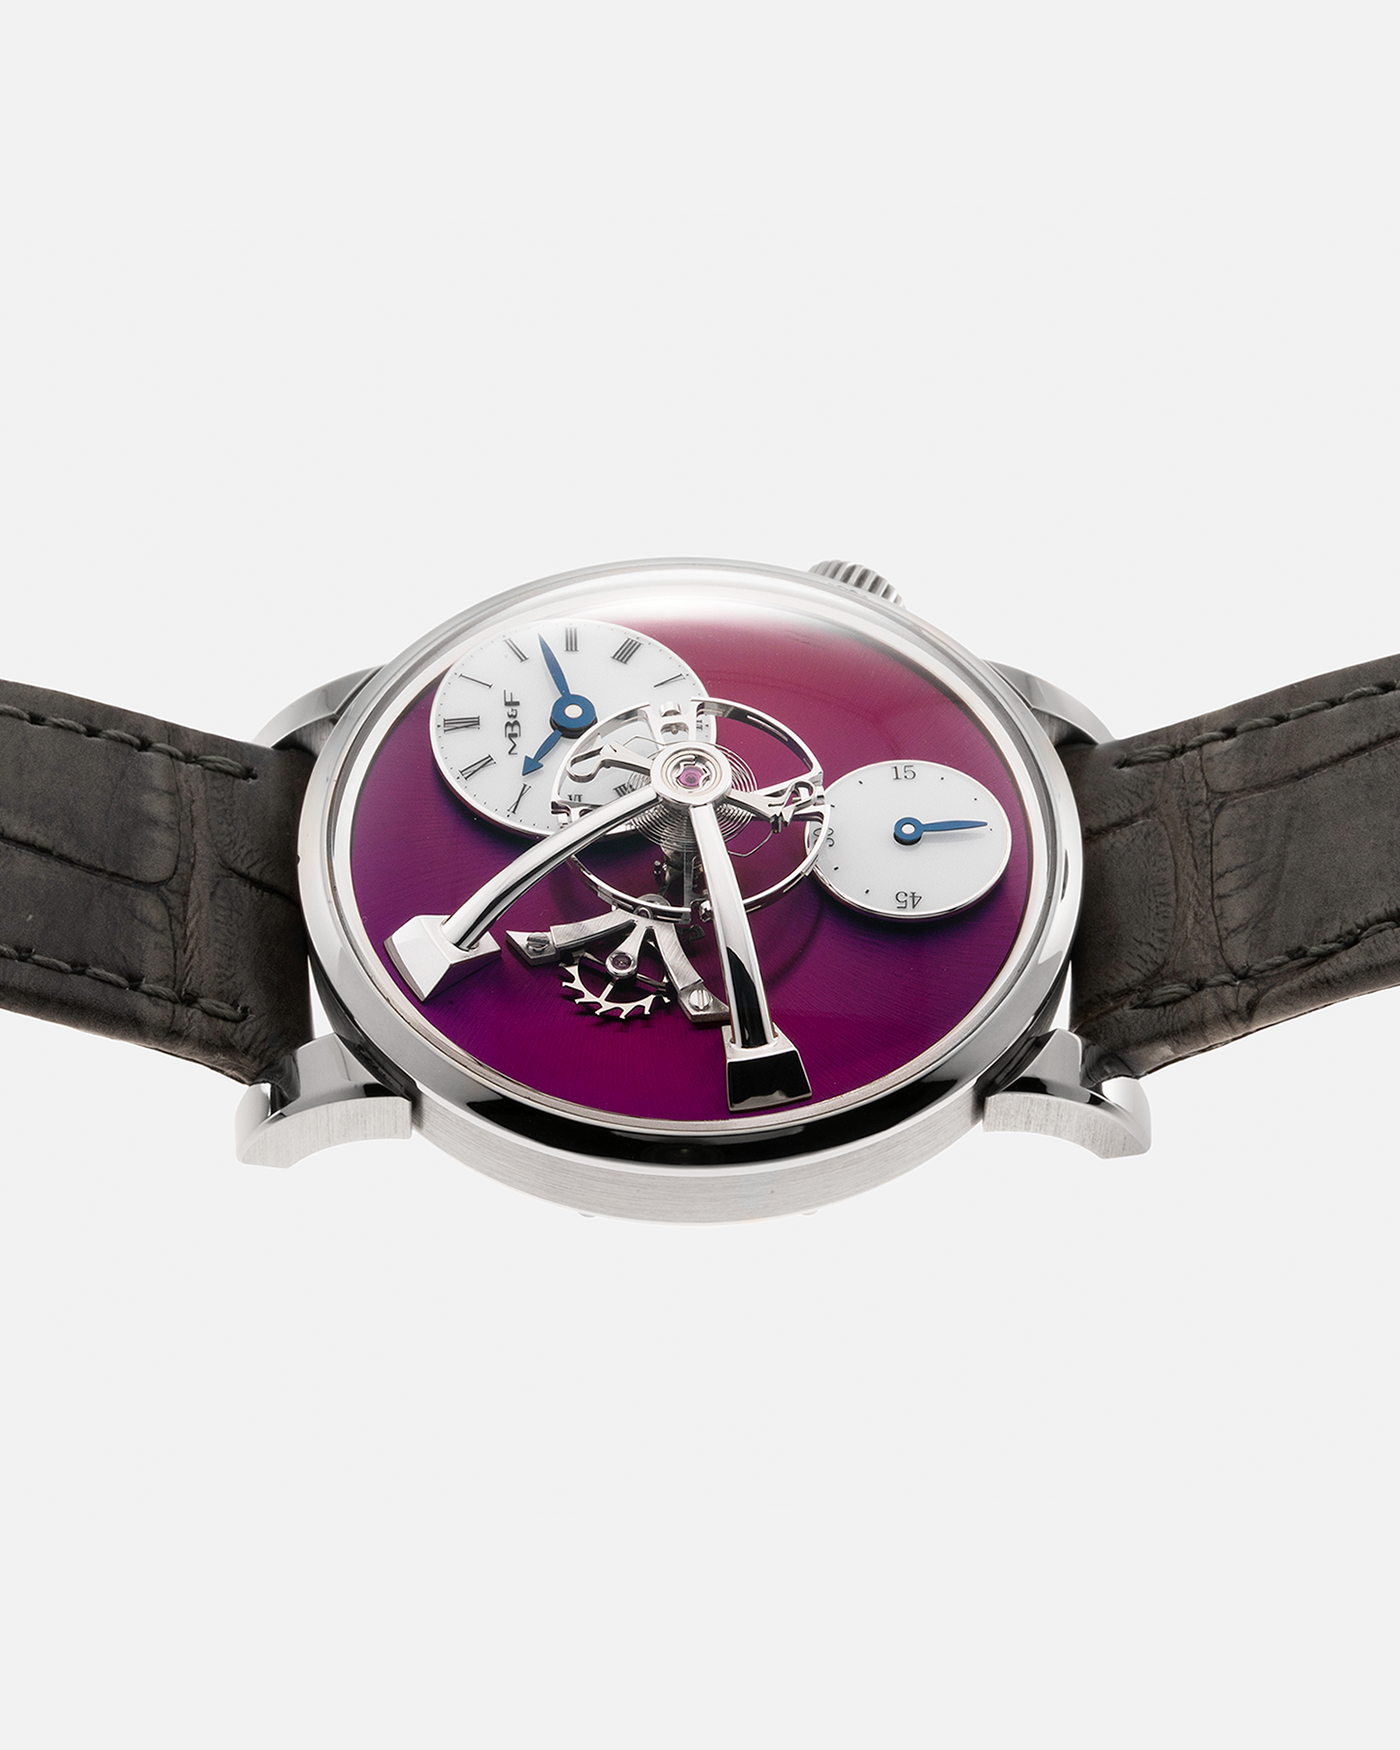 Brand: MB&F Year: 2022 Model: LM101 ‘White Gold Purple’ Reference: 51.W1L.W Material: 18-carat White Gold with Purple Baseplate Movement: In-House 3-Dimensional MB&F Caliber in Collaboration with Kari Voutilainen, Manual-Winding Case Diameter: 40mm Strap: MB&F Grey Alligator Strap and Signed Palladium Deployant Clasp, Additional MB&F Black Silicon Strap with Purple Stitching